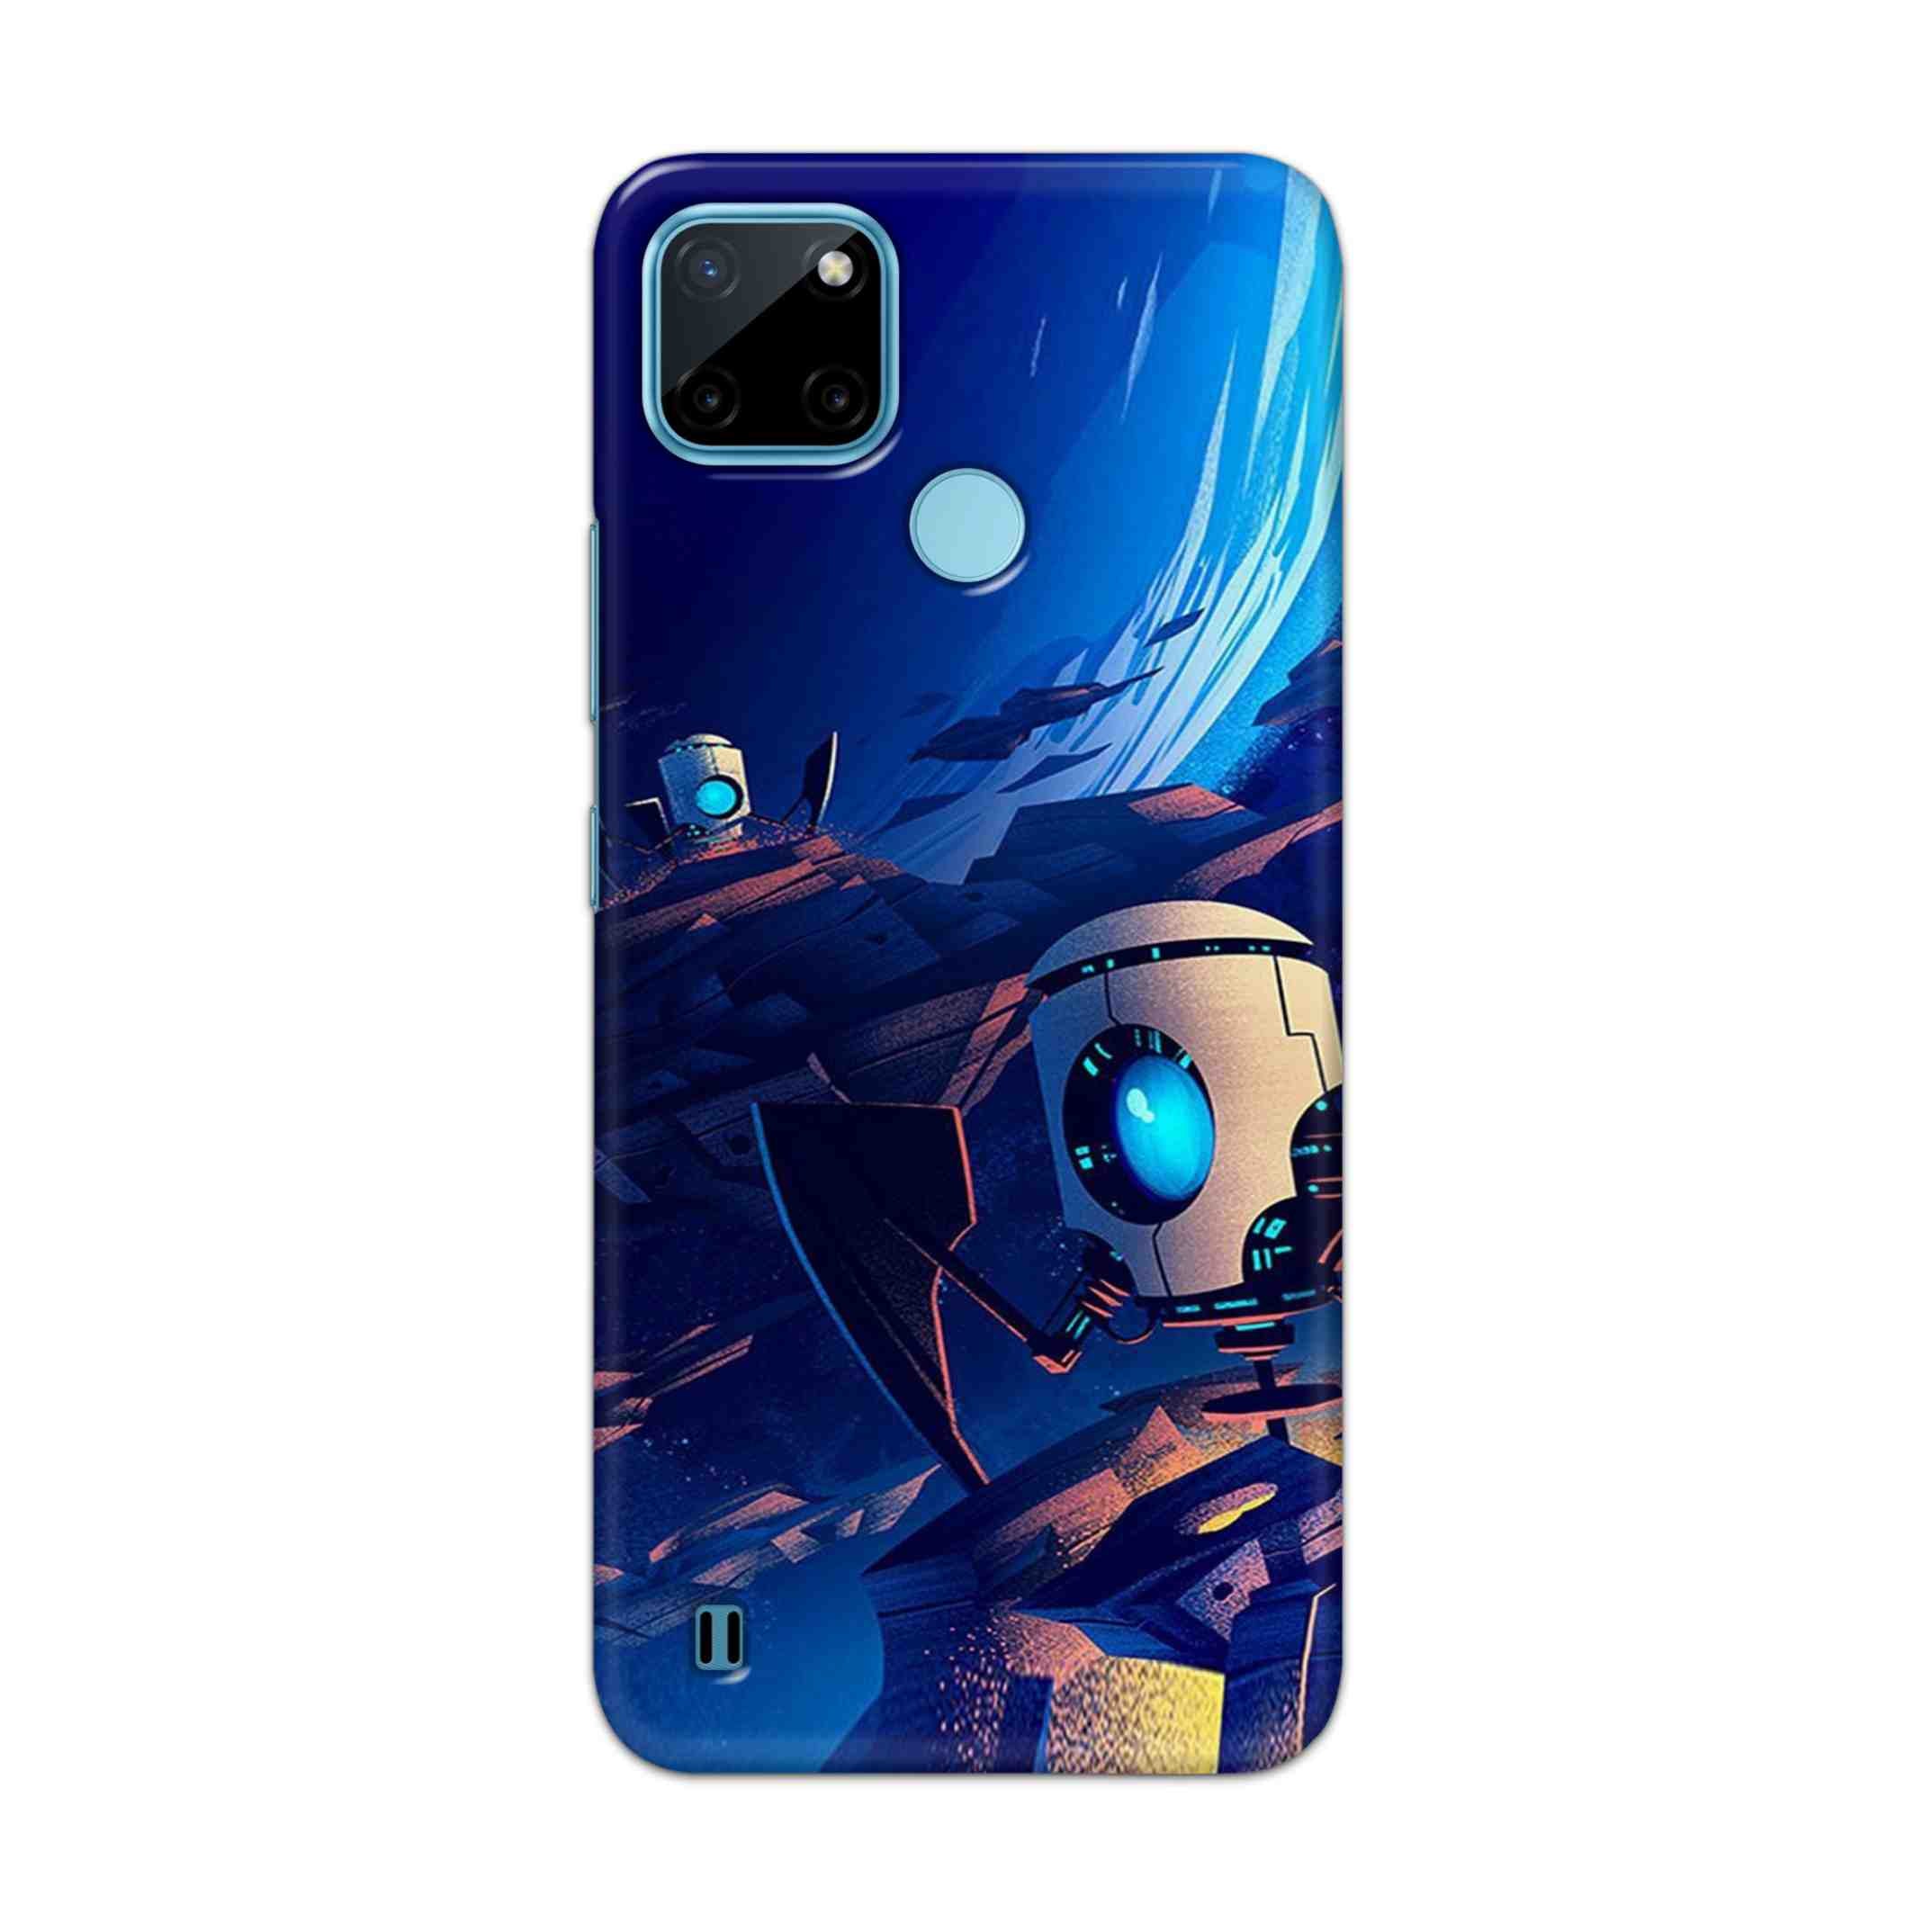 Buy Spaceship Robot Hard Back Mobile Phone Case Cover For Realme C21Y Online